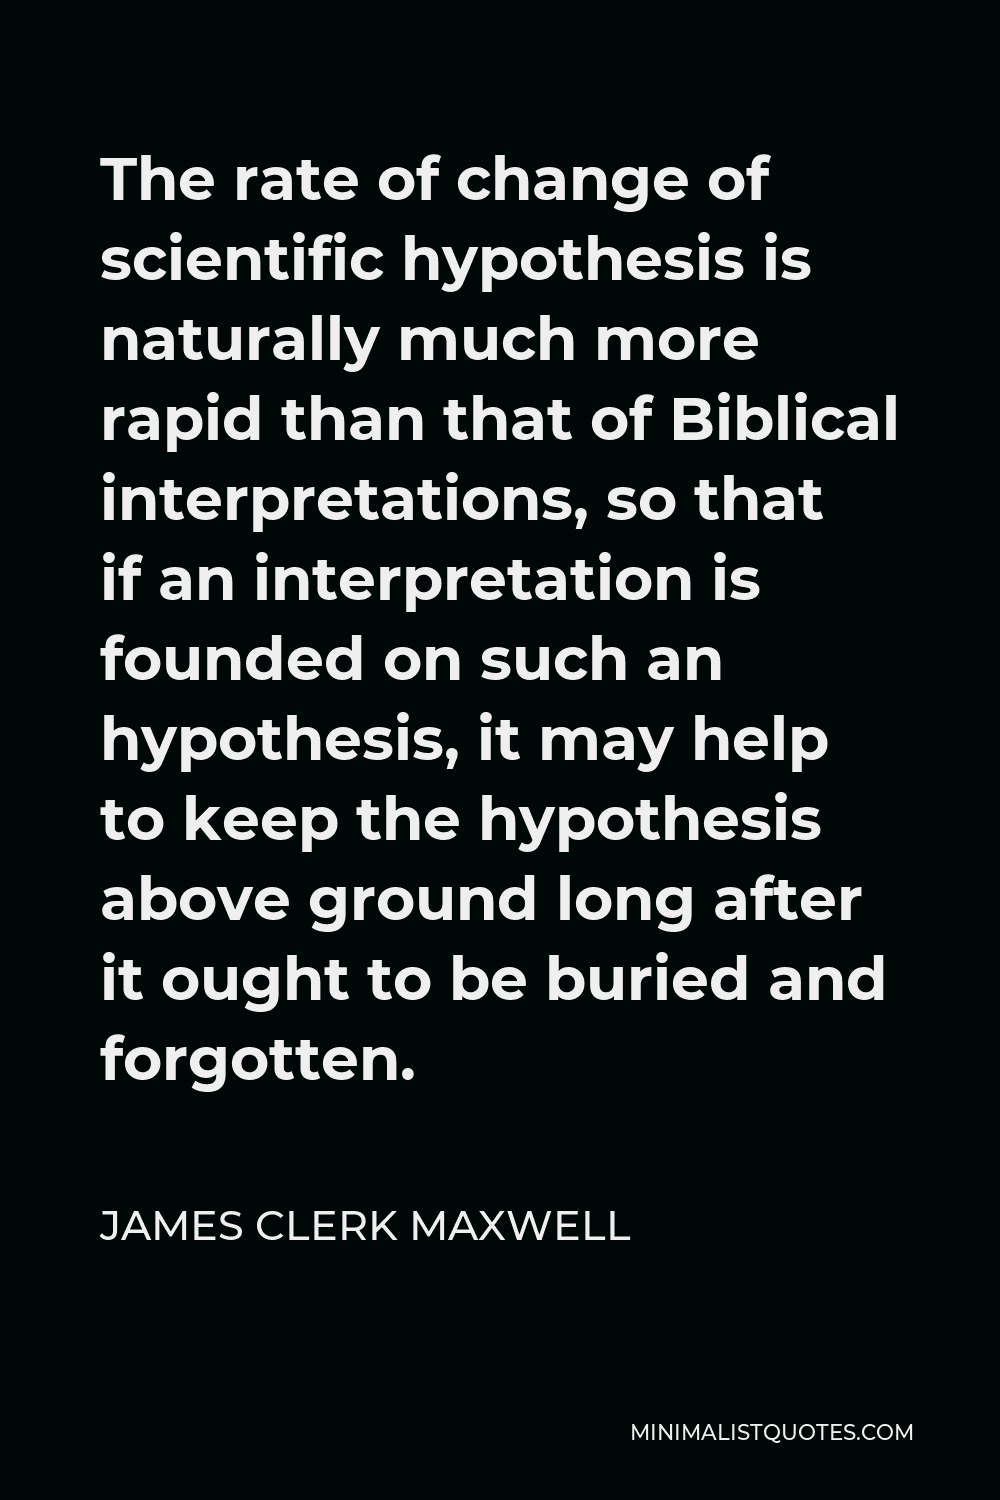 James Clerk Maxwell Quote - The rate of change of scientific hypothesis is naturally much more rapid than that of Biblical interpretations, so that if an interpretation is founded on such an hypothesis, it may help to keep the hypothesis above ground long after it ought to be buried and forgotten.